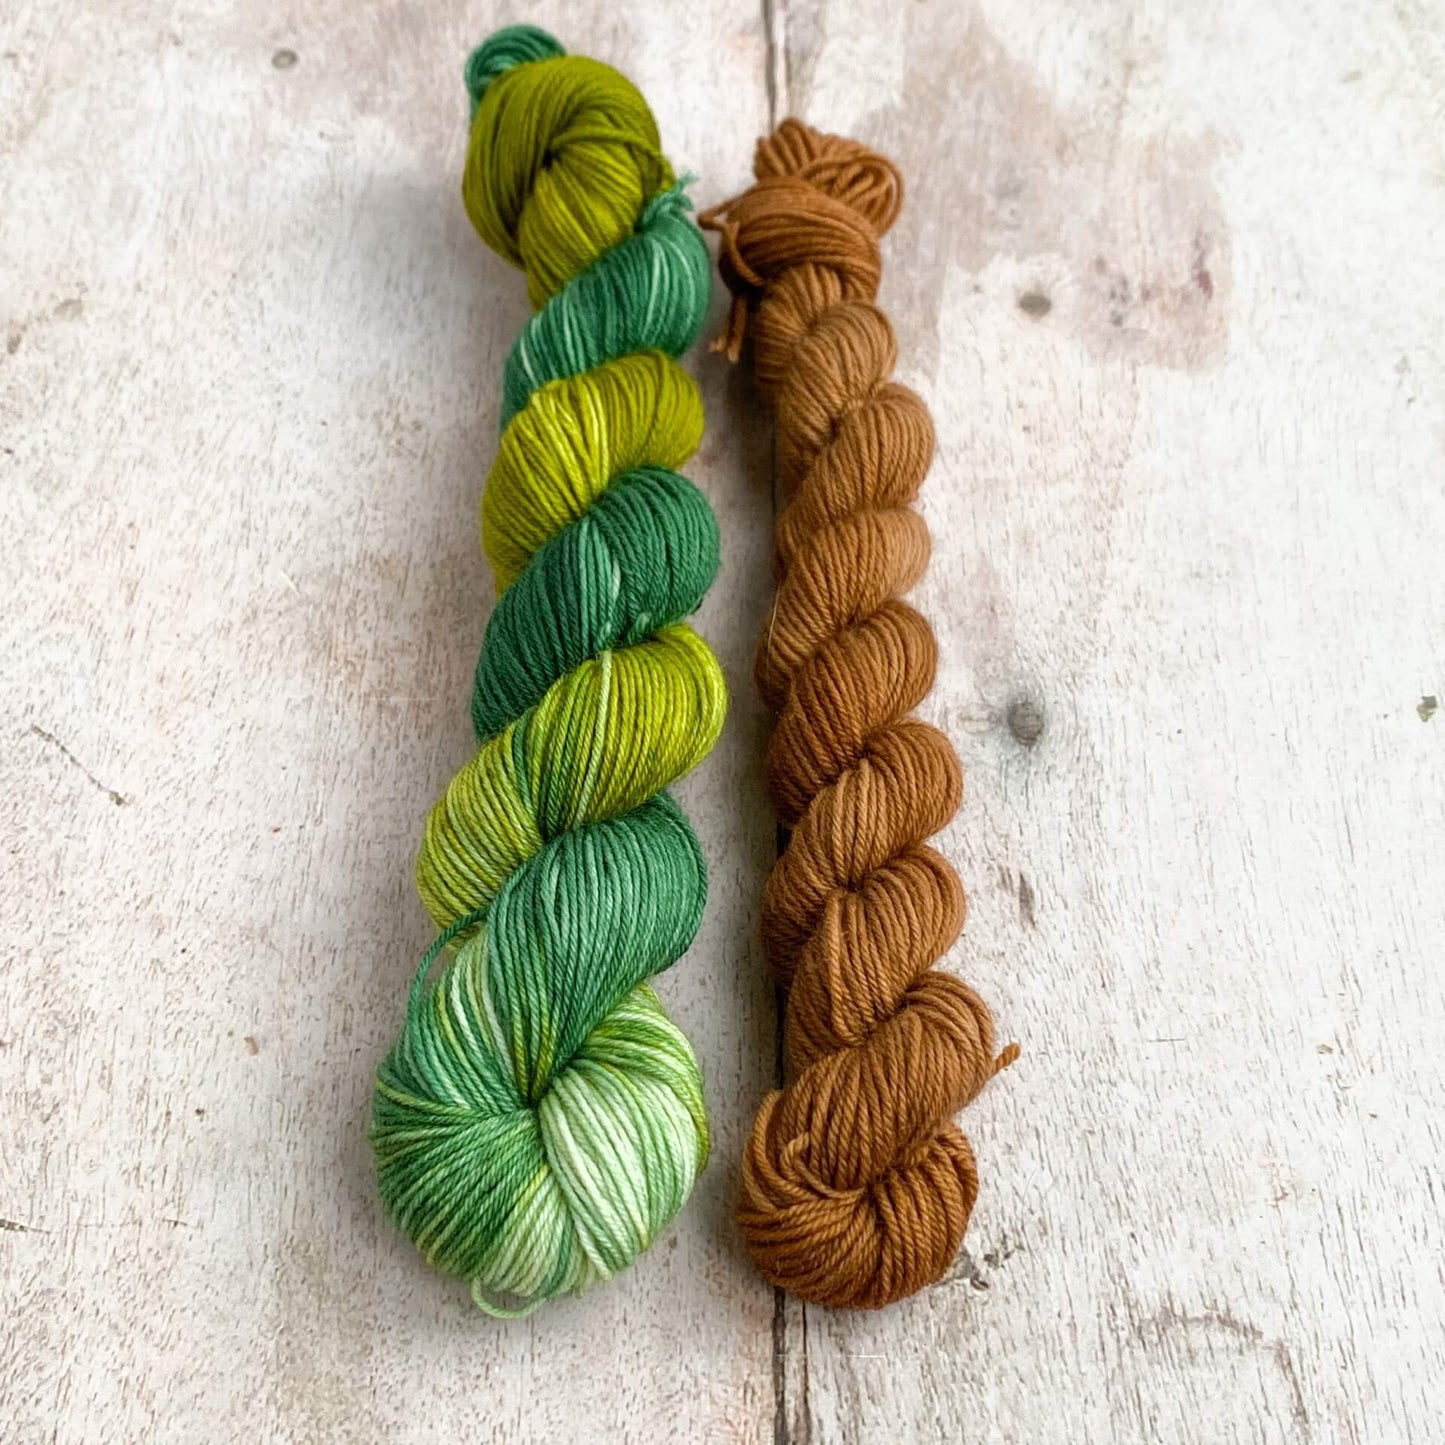 Two skeins of yarn hand dyed to look like a wintery fir tree sit on a wooden table. 